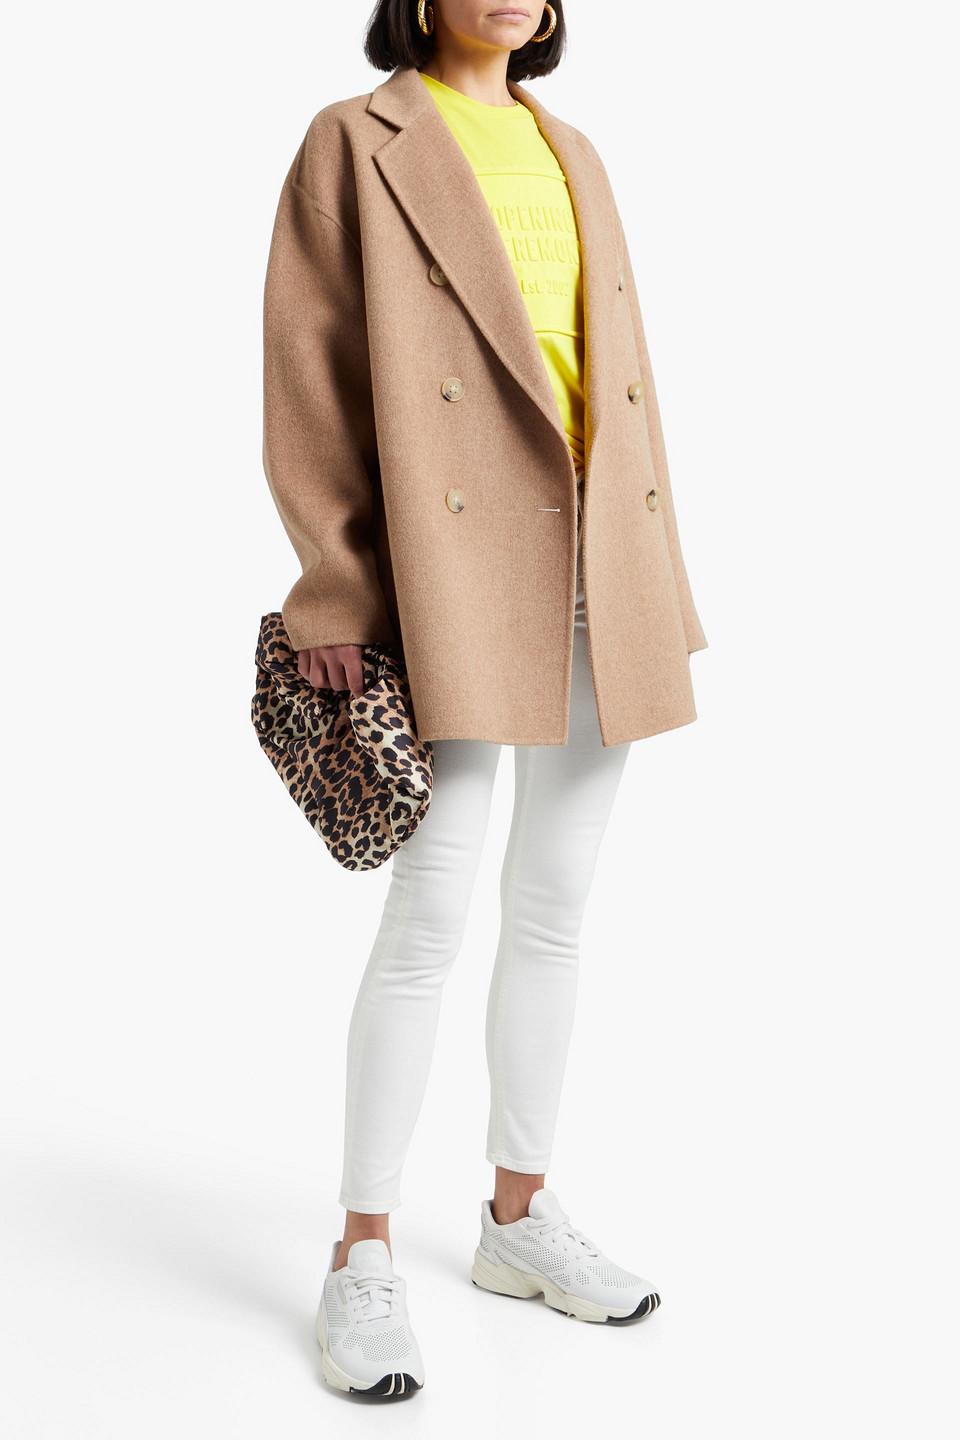 Acne Studios Oversized Double-breasted Wool-felt Coat in Natural | Lyst